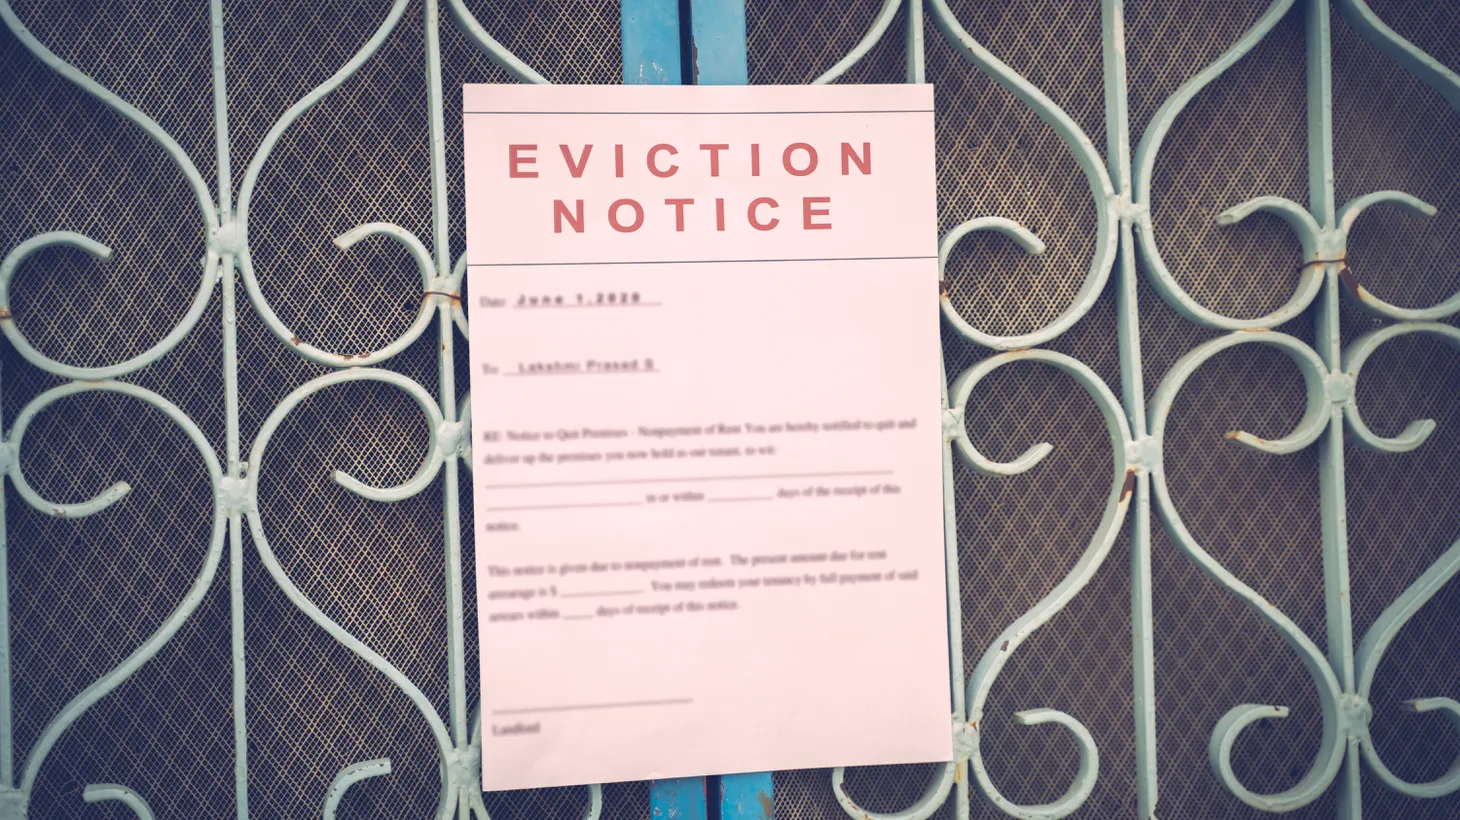 About 50,000 Angelenos are expected to receive eviction notices this year, according to the countywide eviction support program Stay Housed LA.